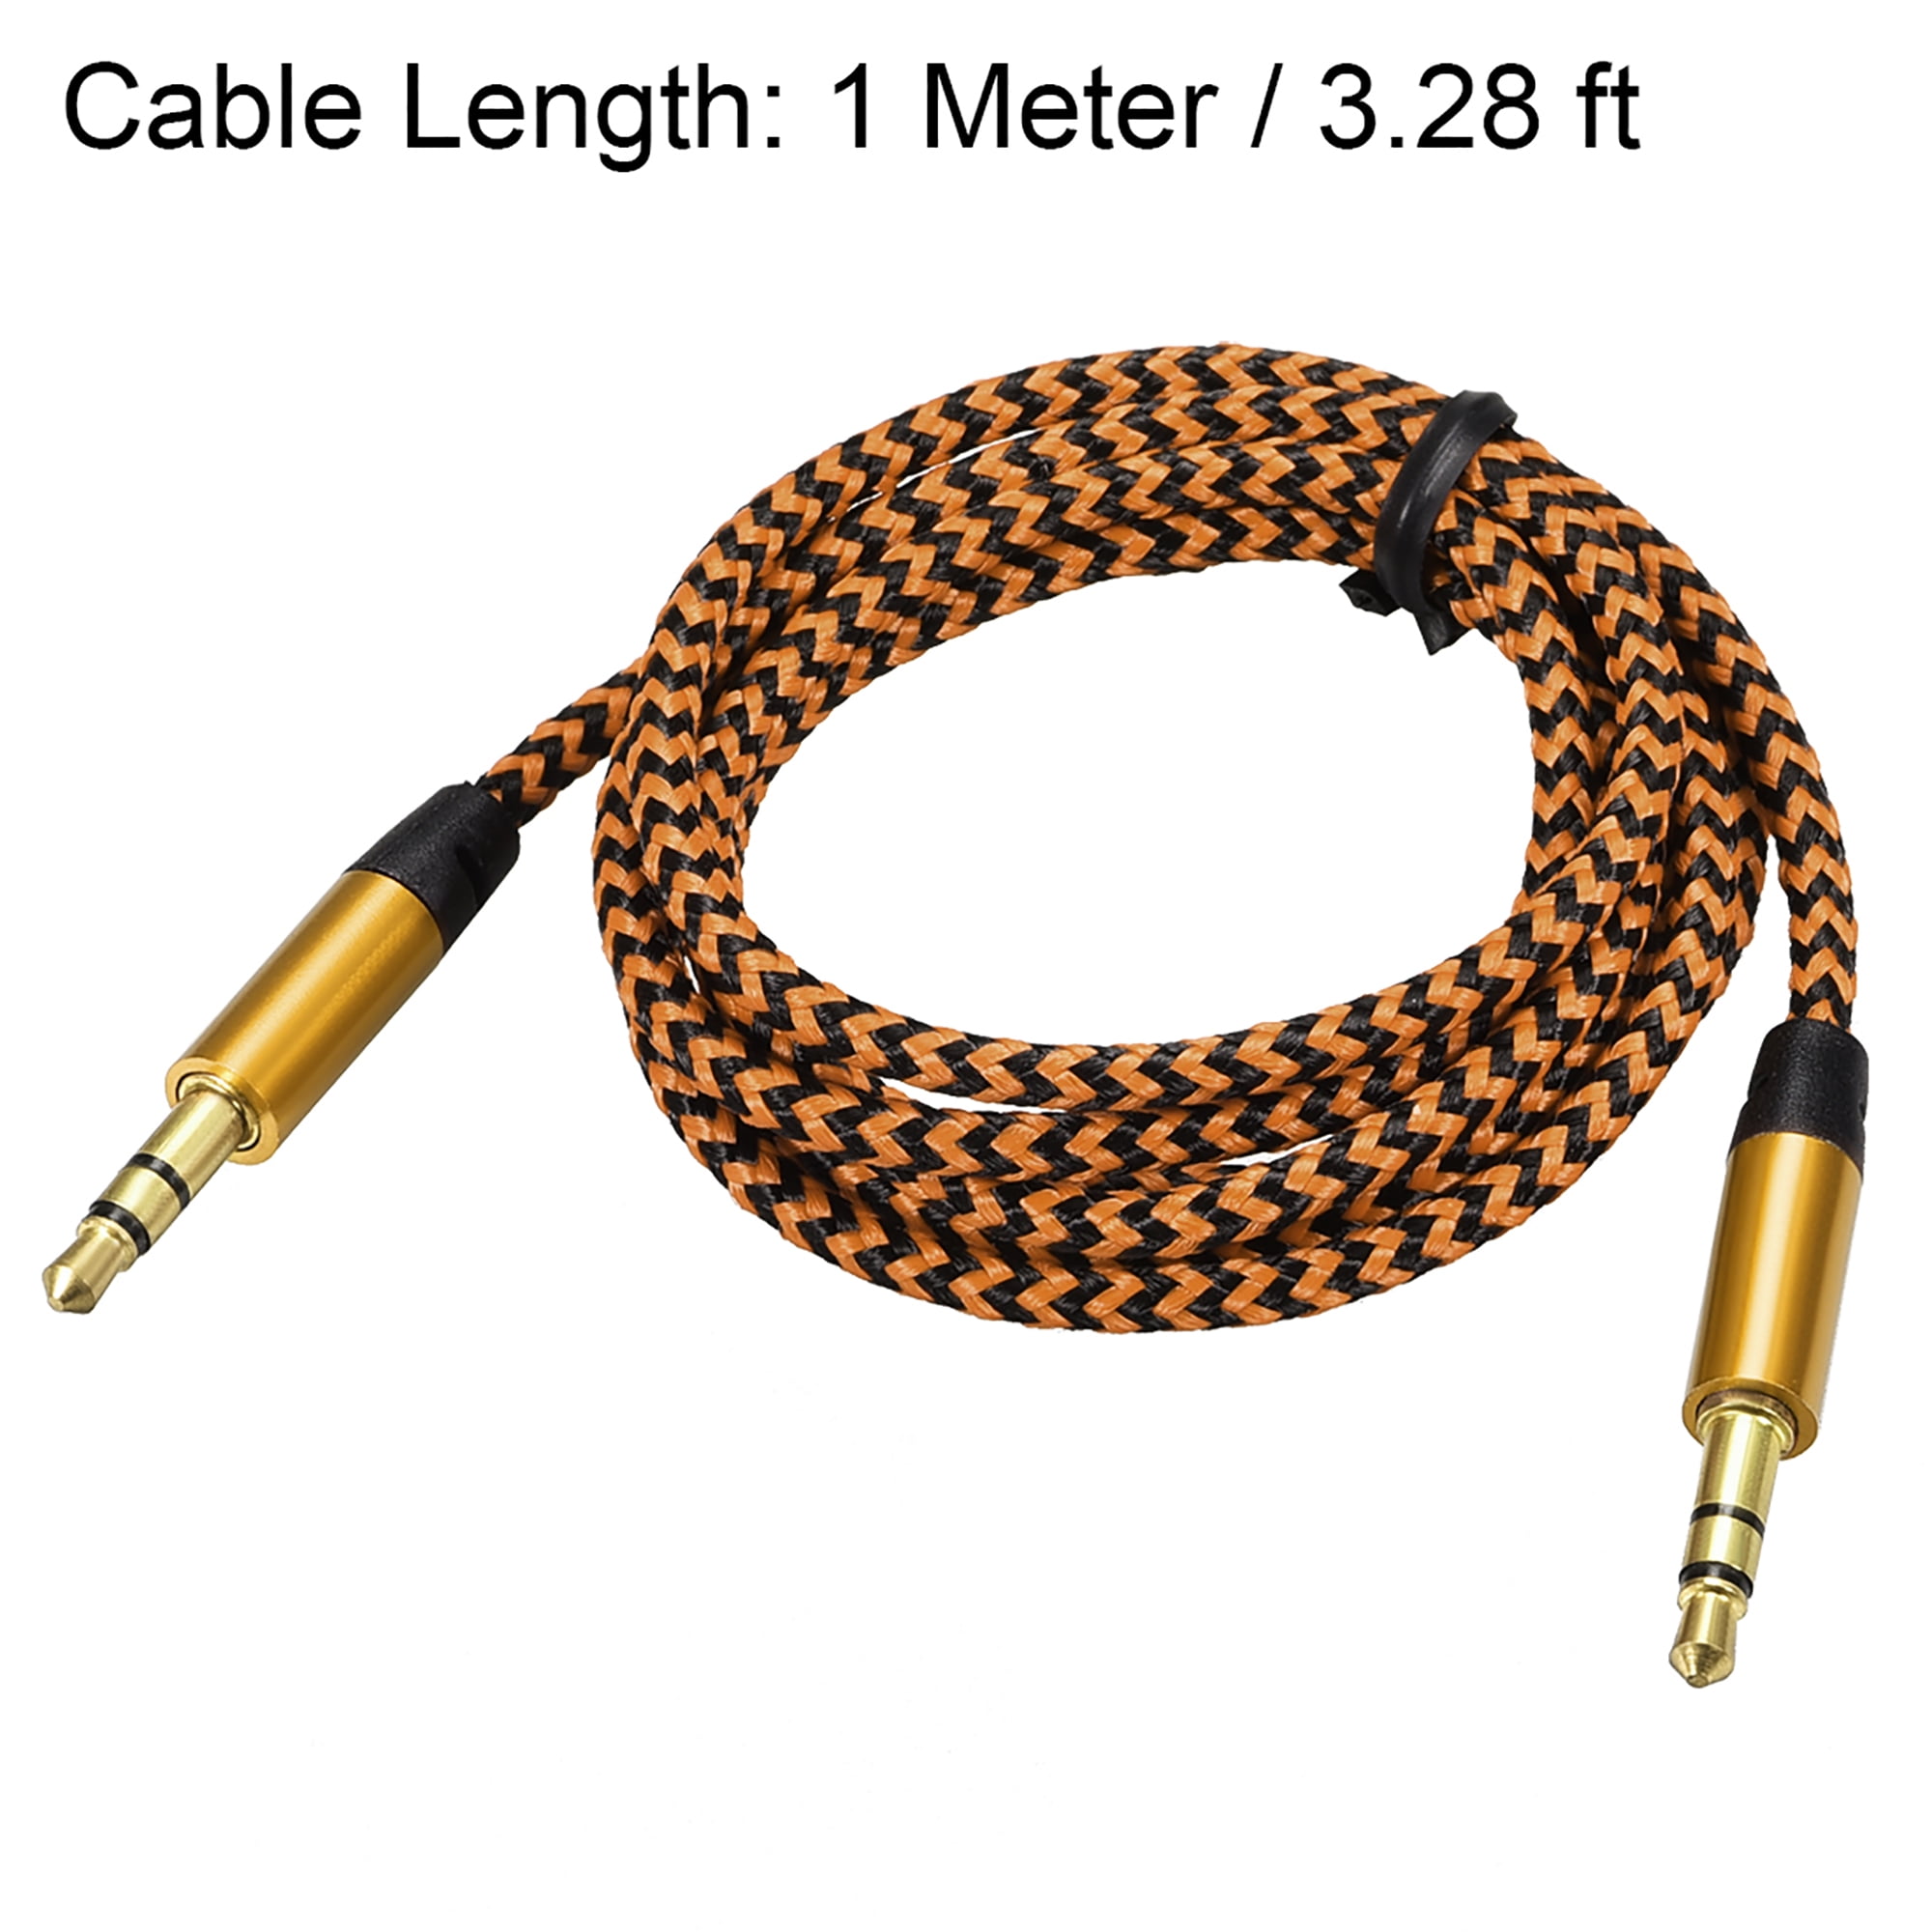 Element-Hz™ 6.3mm / 1/4″ Male Mono to 6.3mm / 1/4″ Male Mono Audio Cable (1  Meter / 3.28ft)